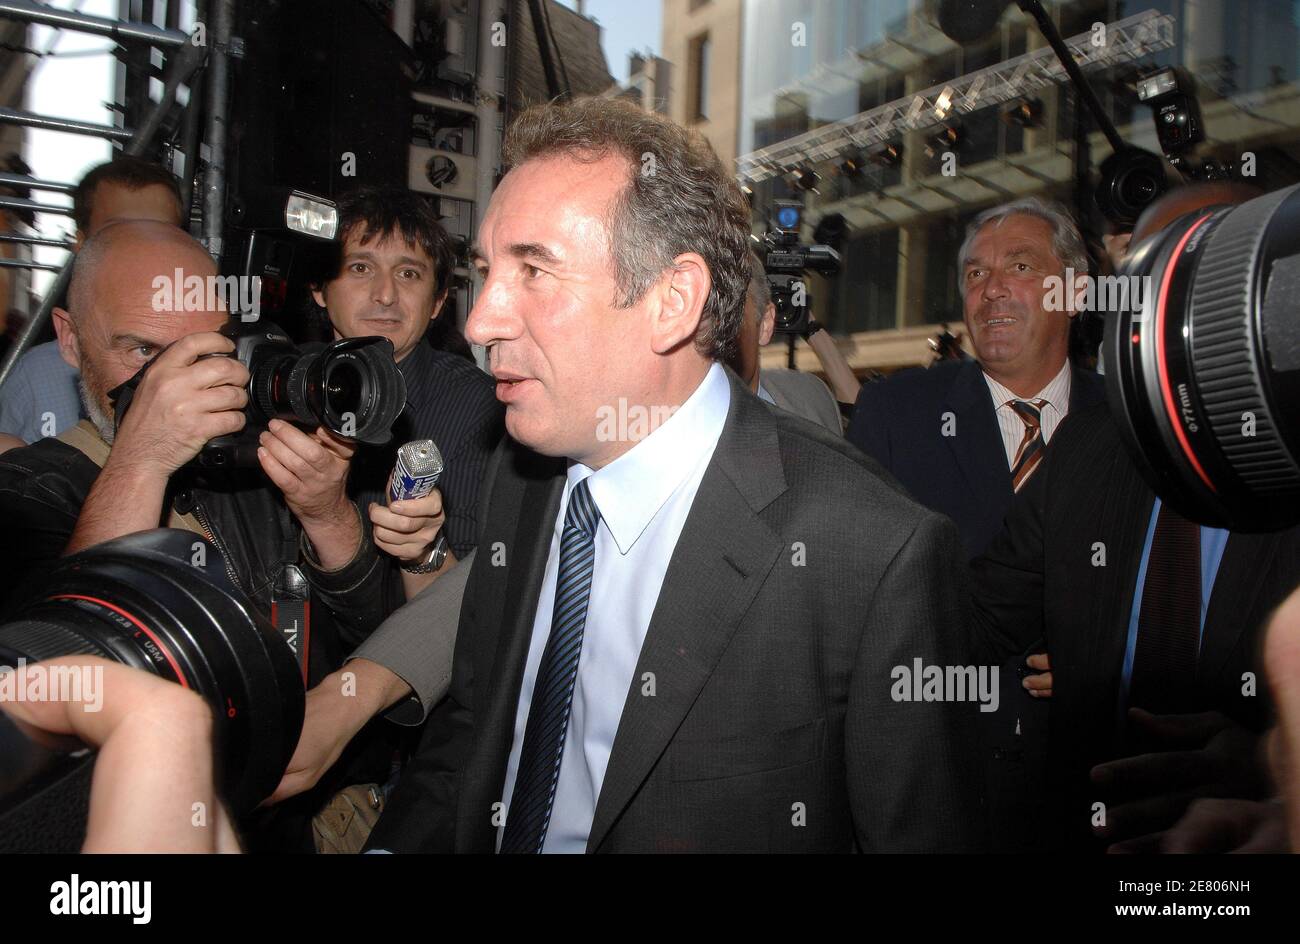 UDF leader and presidential candidate Francois Bayrou arrives at his headquarter in Paris, France on April 22, 2007. Photo by Christophe Guibbaud/ABACAPRESS.COM Stock Photo